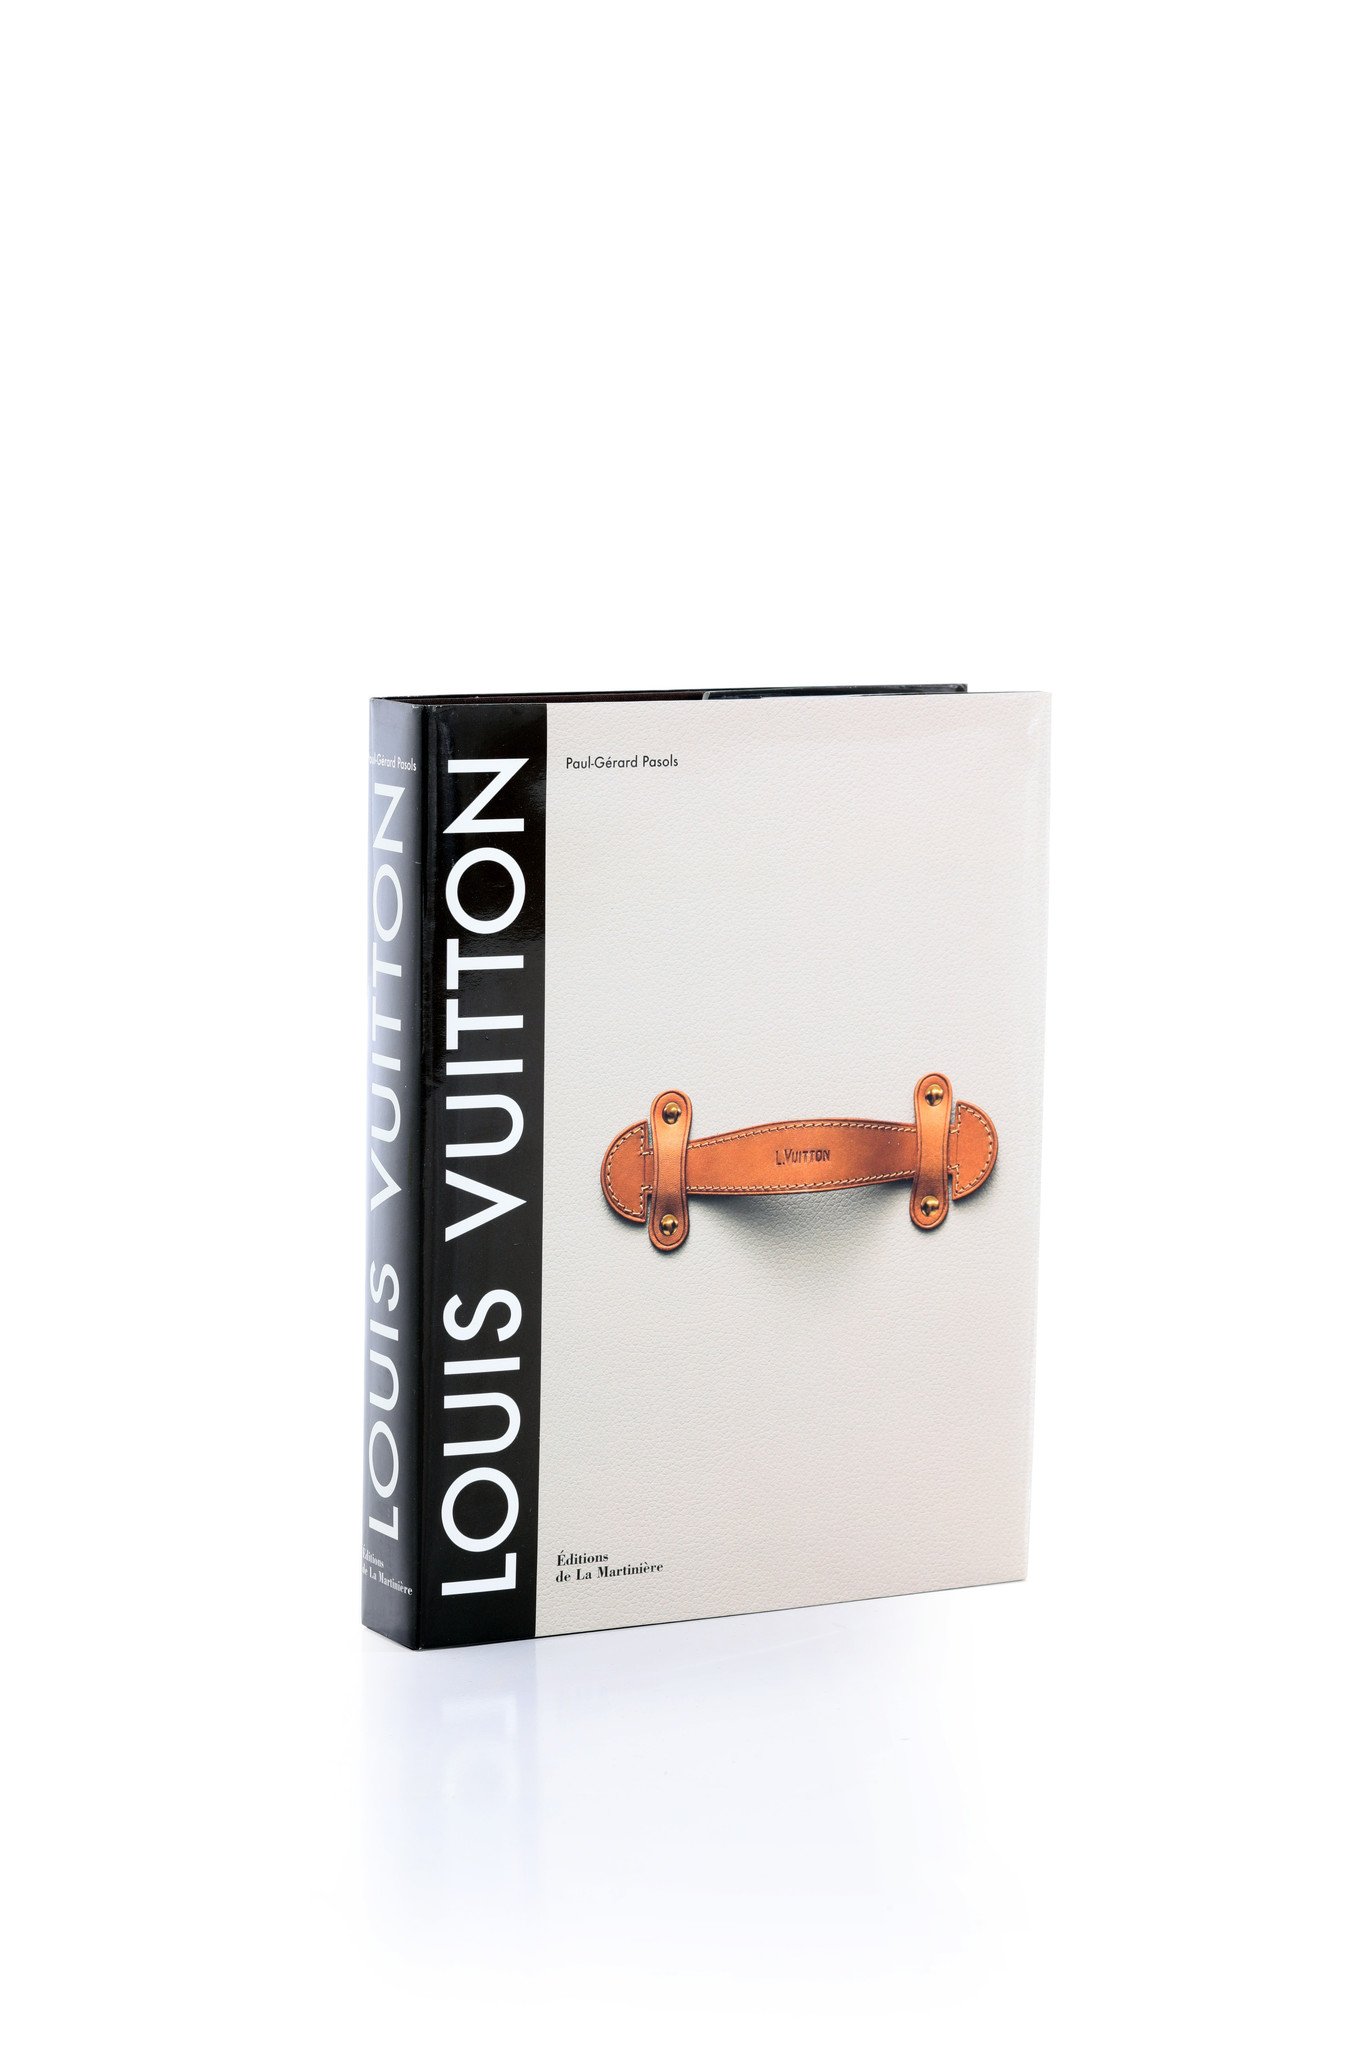 Louis Vuitton Book The birth of modern luxury, 2004 - THE HOUSE OF WAUW